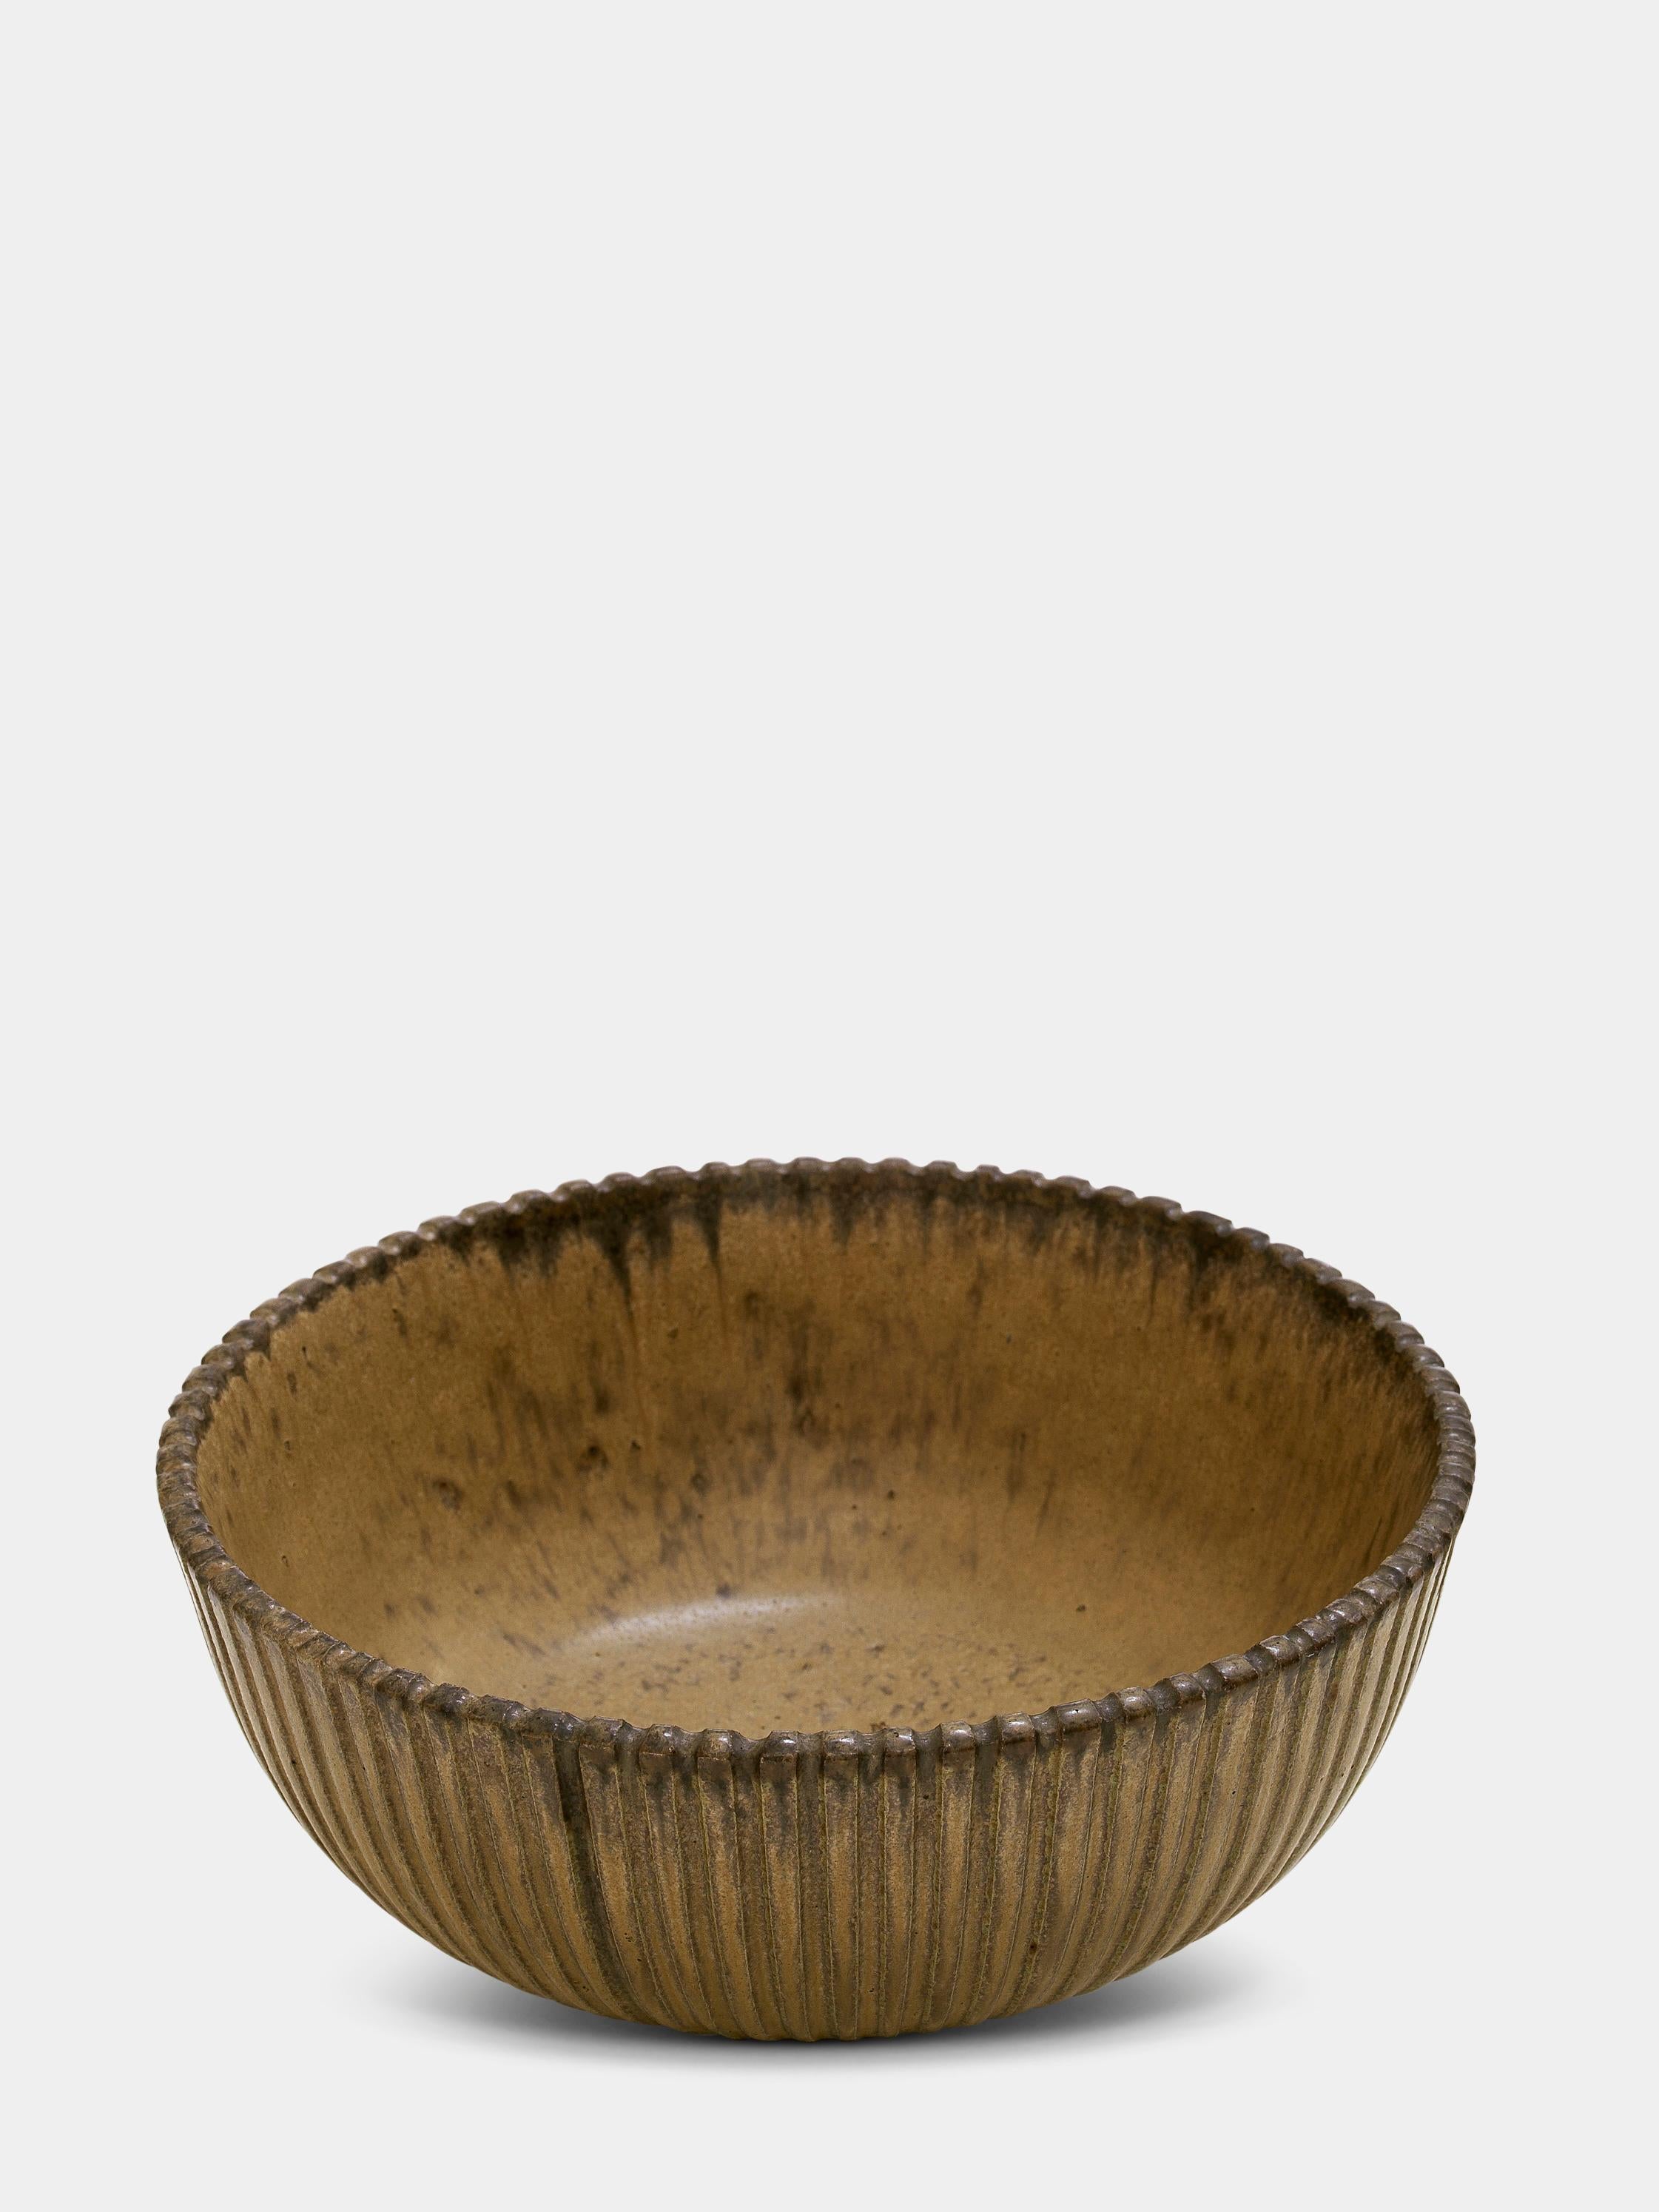 Arne Bang (1901-1983)

Bowl by the Danish ceramist, Arne Bang, decorated in light grey and earth colored glaze

Manufactured in the 1940s.

Stamped 'AB', numbered 123.

 